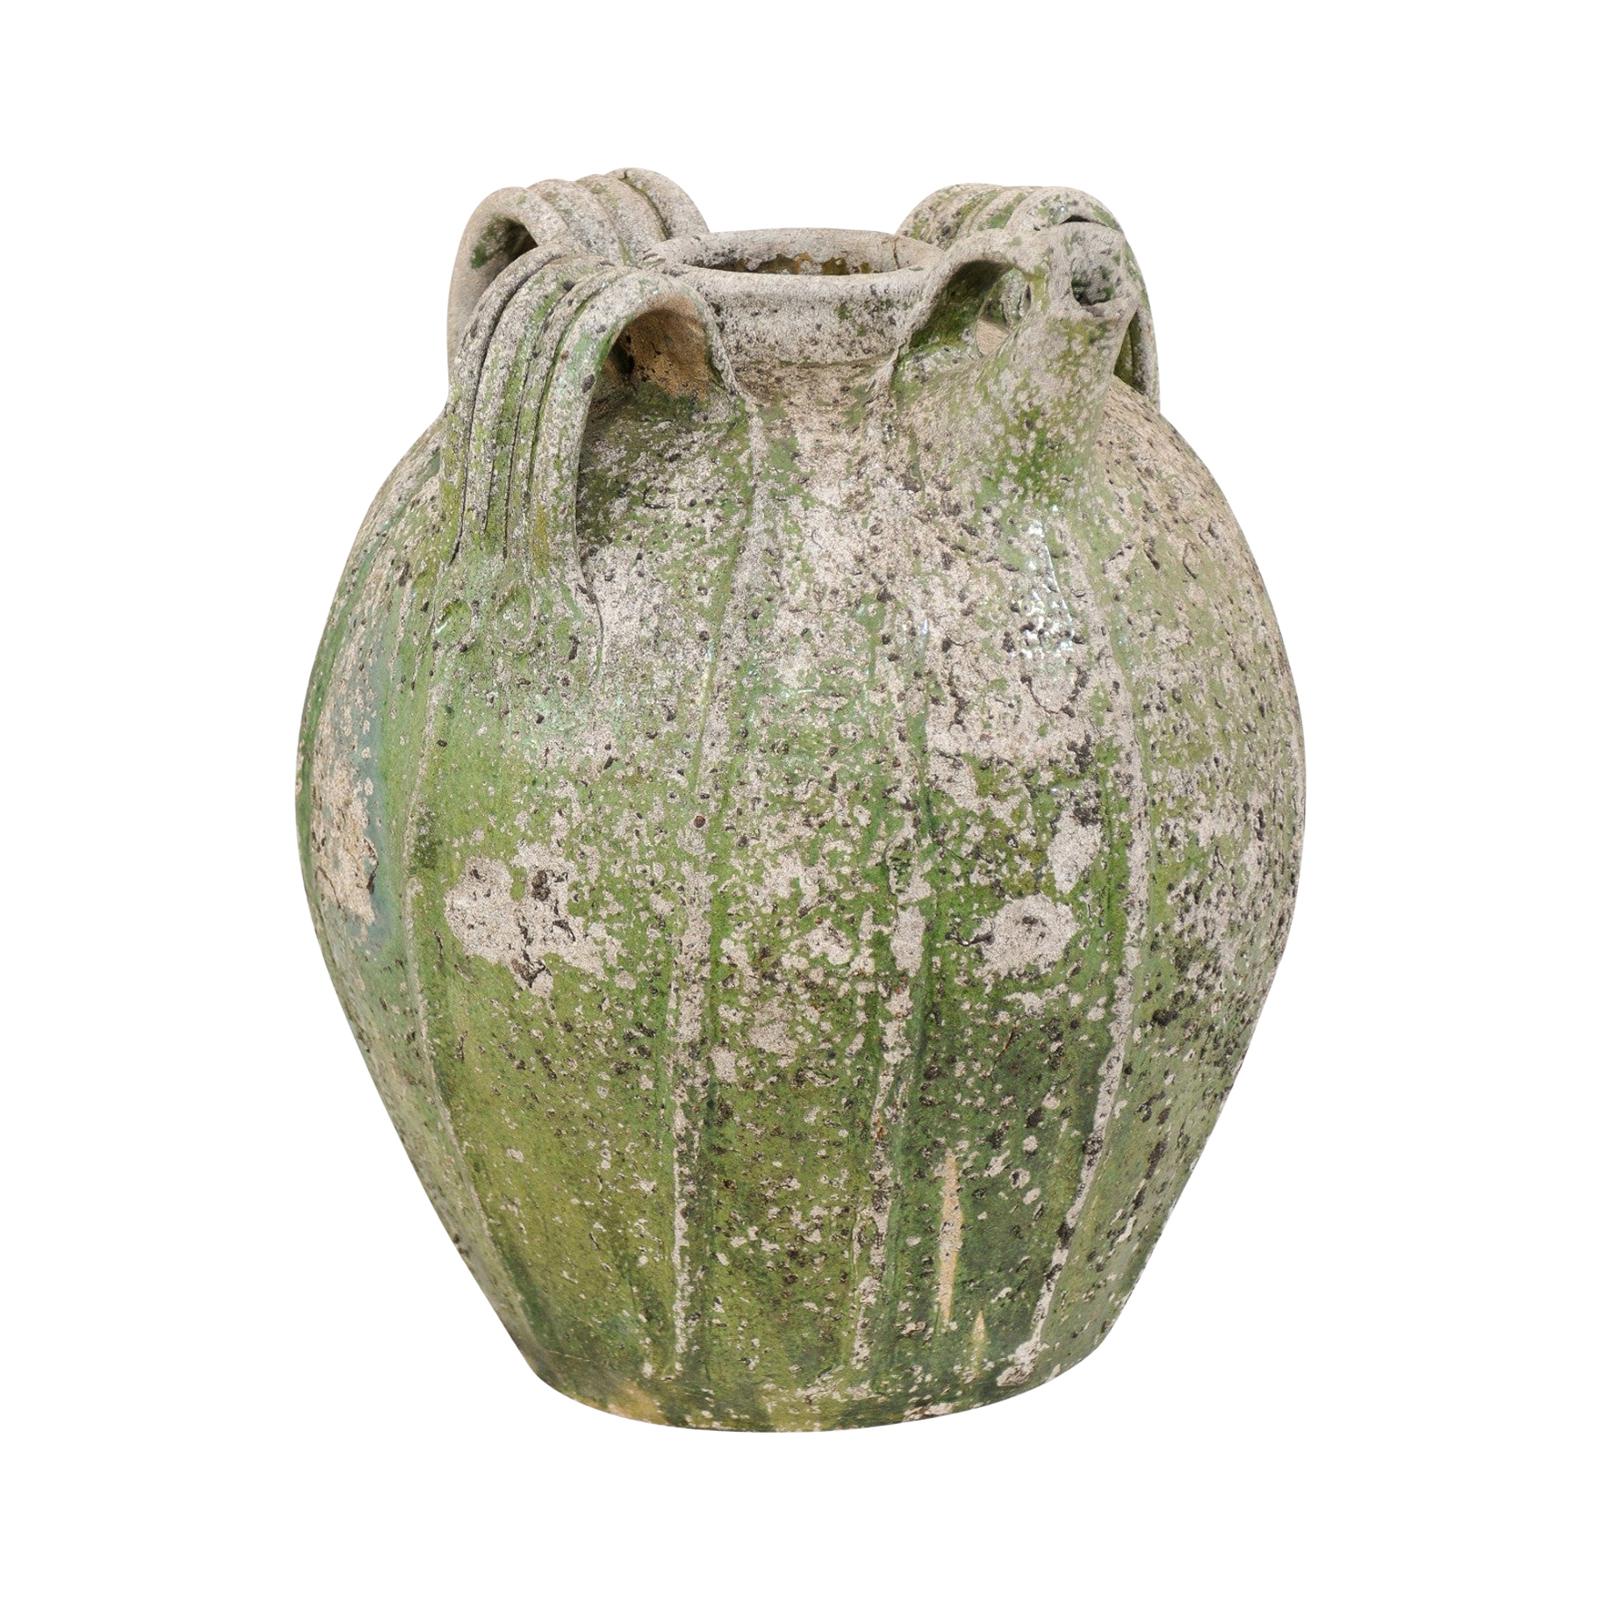 French Terracotta Jar in Green Hues from the 19th Century